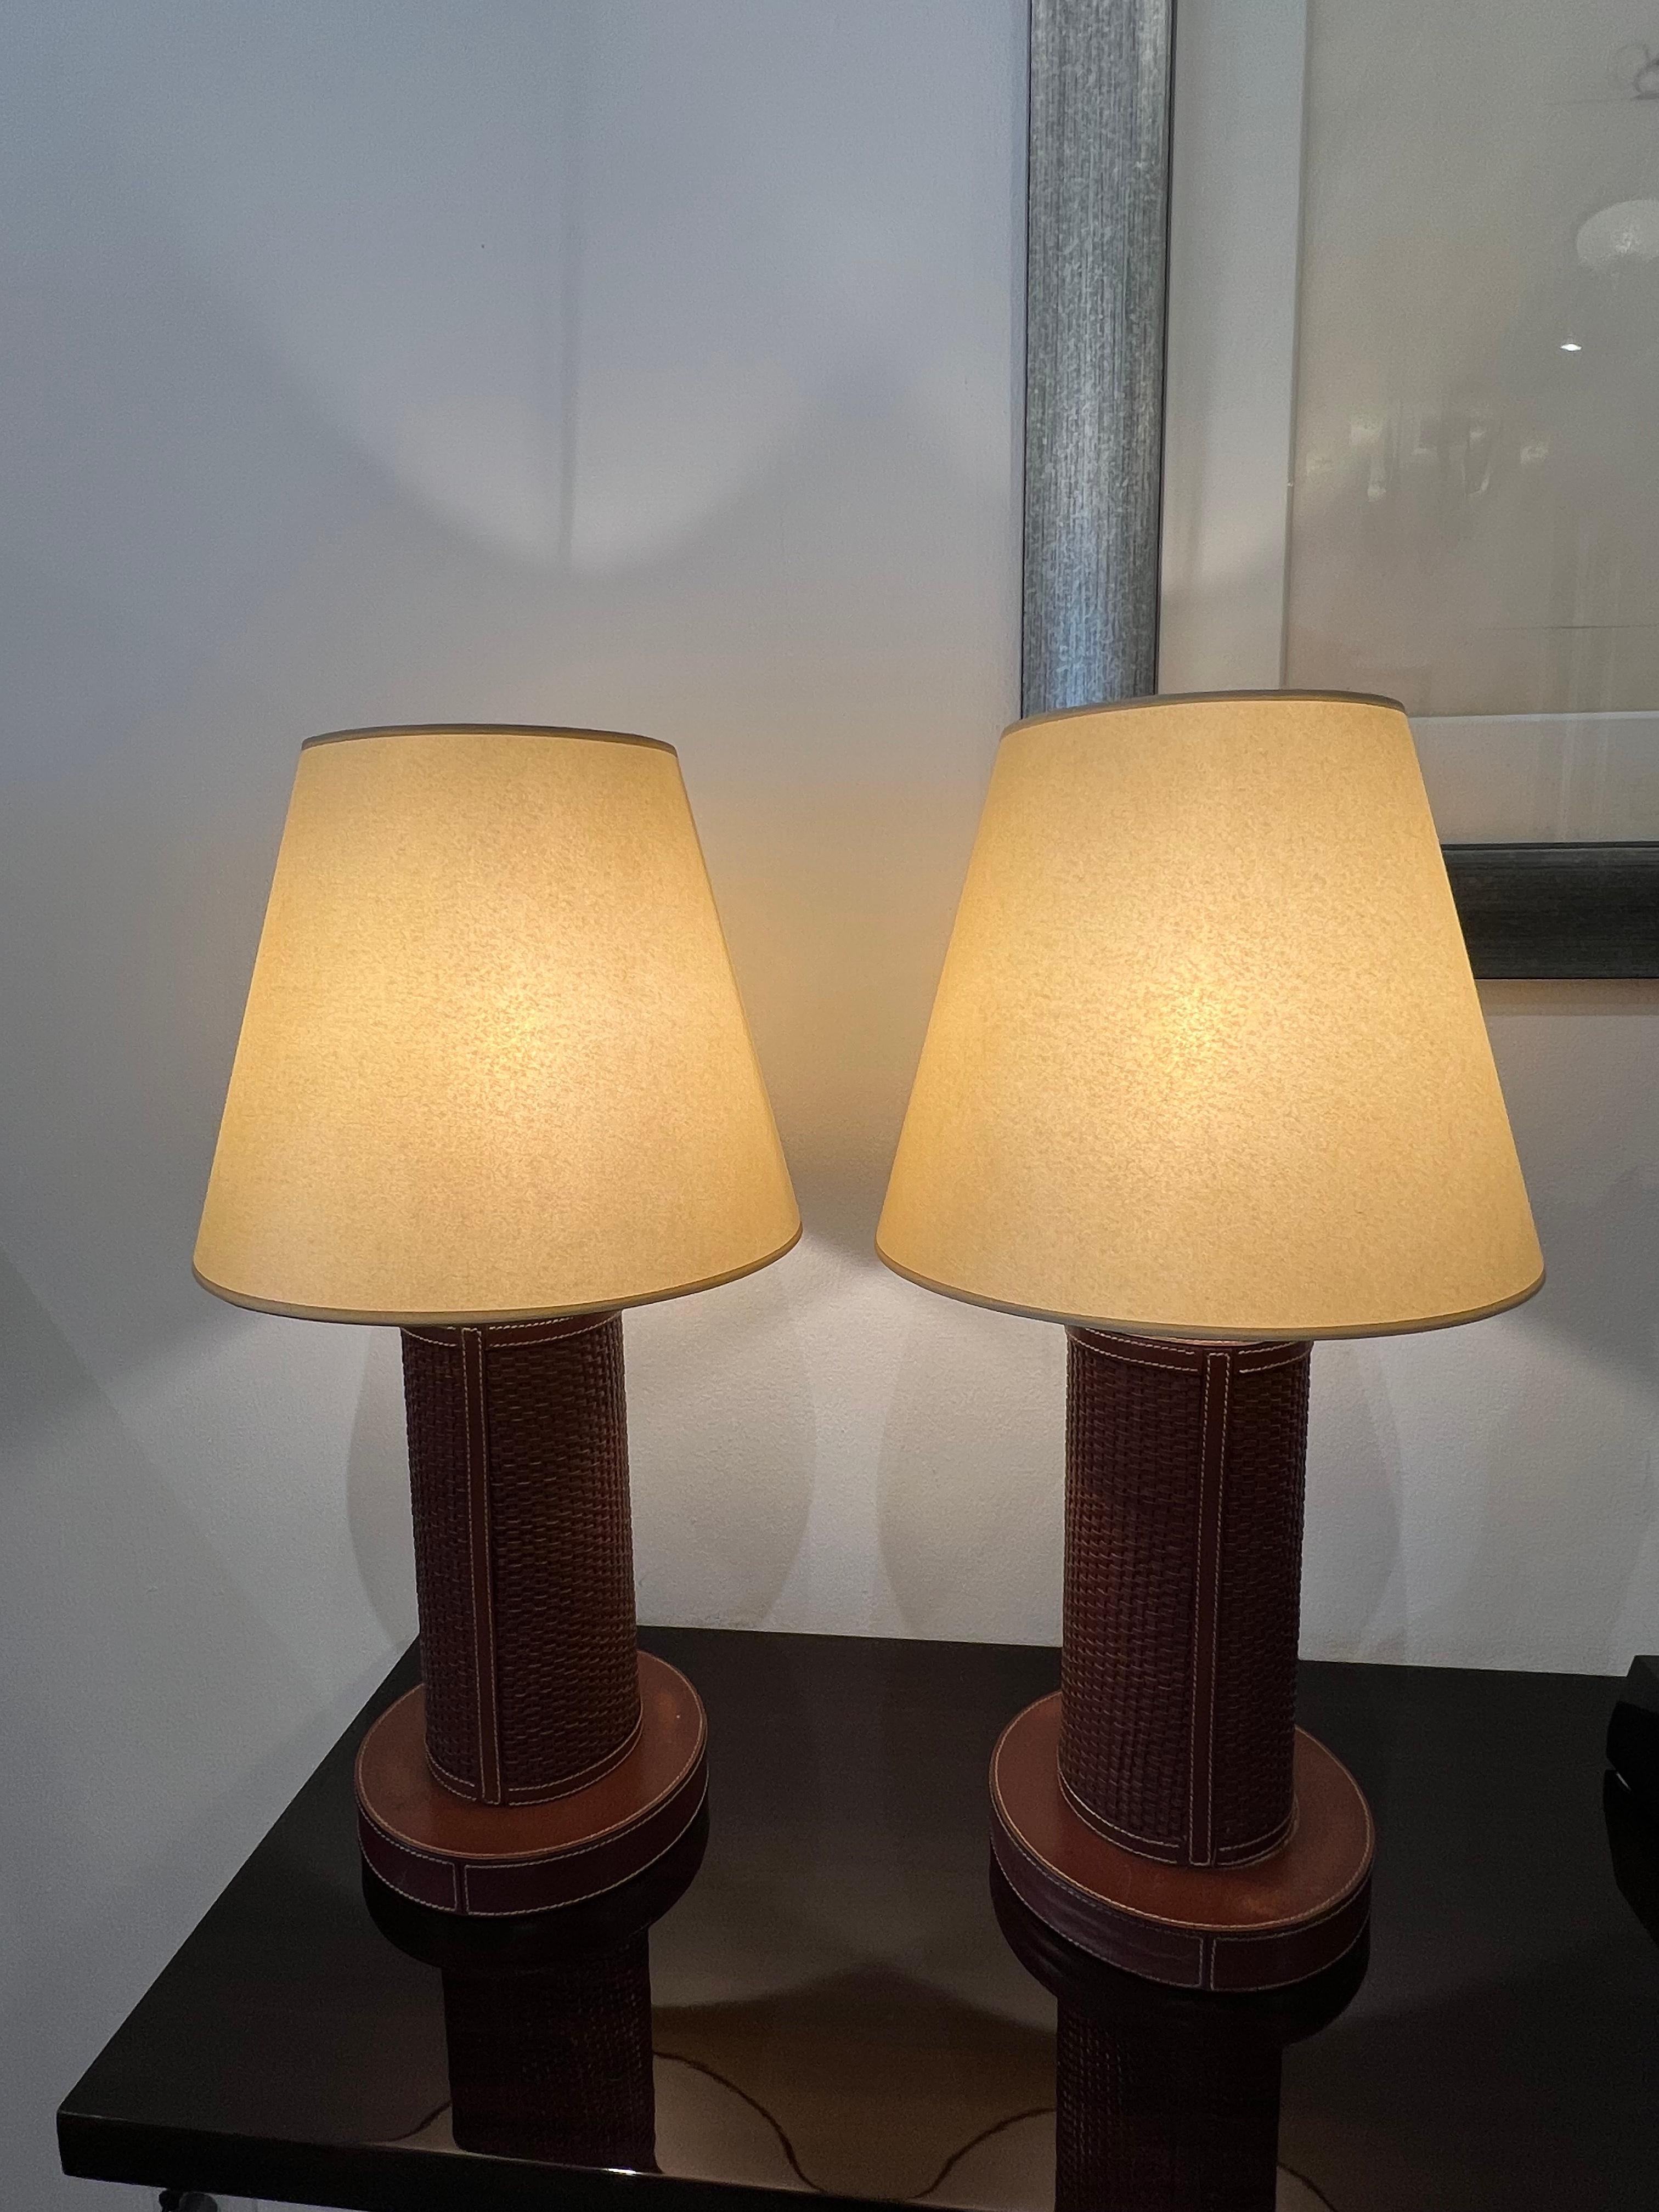 An elegant pair of woven and stitched leather table lamps in saddle color with pergamin shades.
Made in France
Circa: 1960